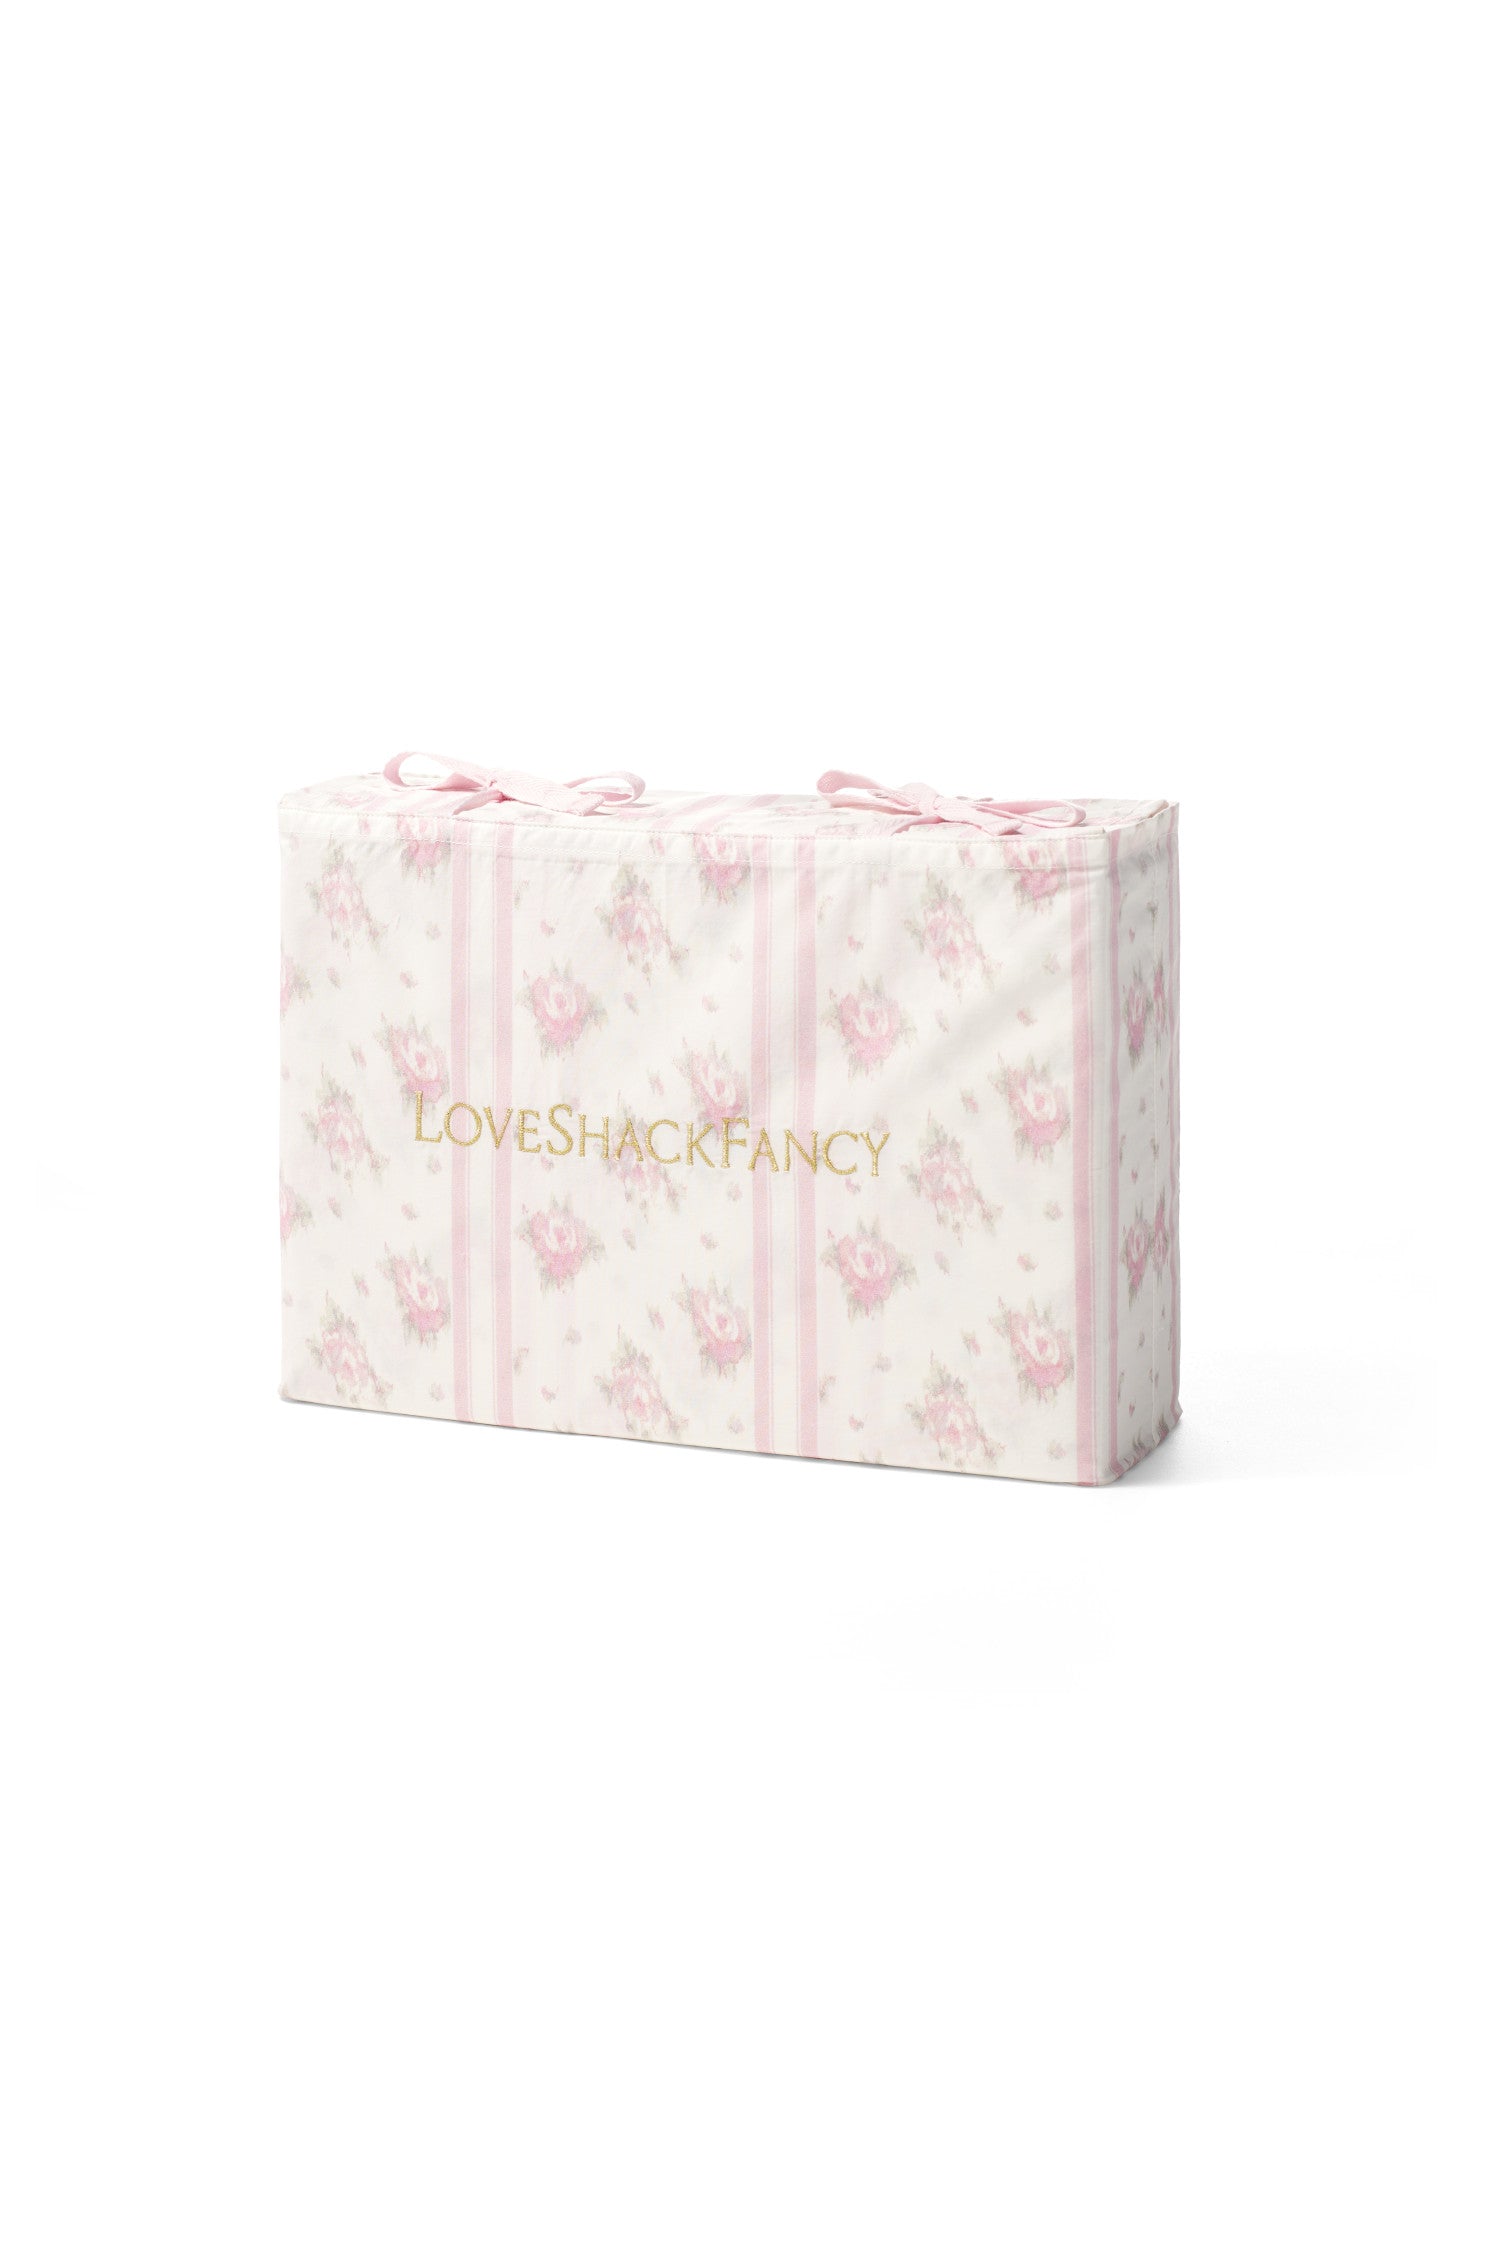 Introducing our lightweight and airy sheets in a beautiful floral pink design. Crafted from 100% cotton, these sheets offer the perfect combination of comfort and breathability.